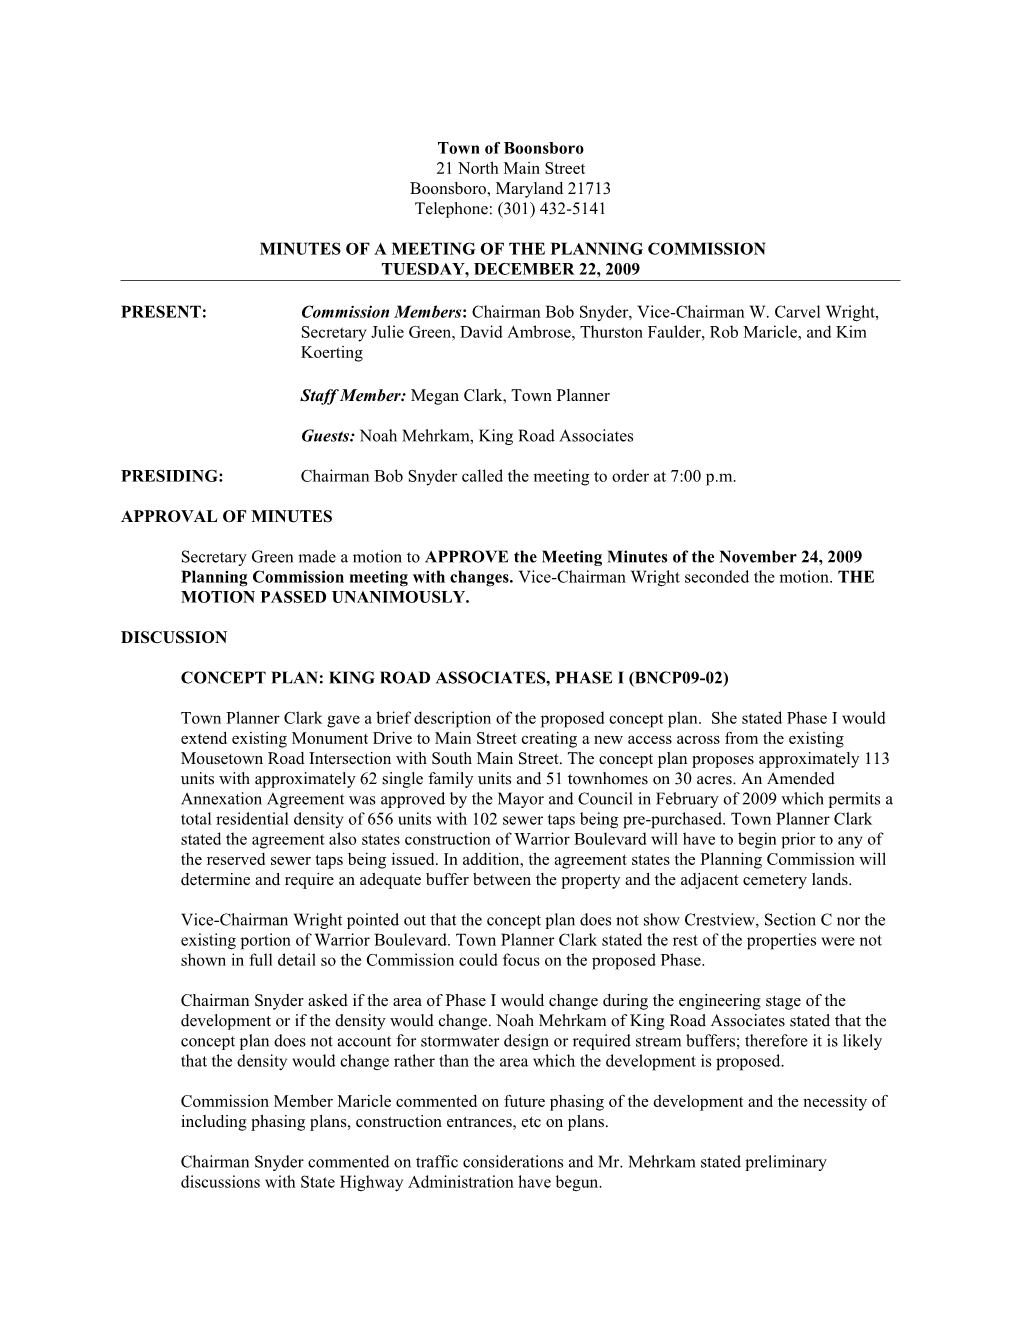 Boonsboro Planning Commission Minutes s1